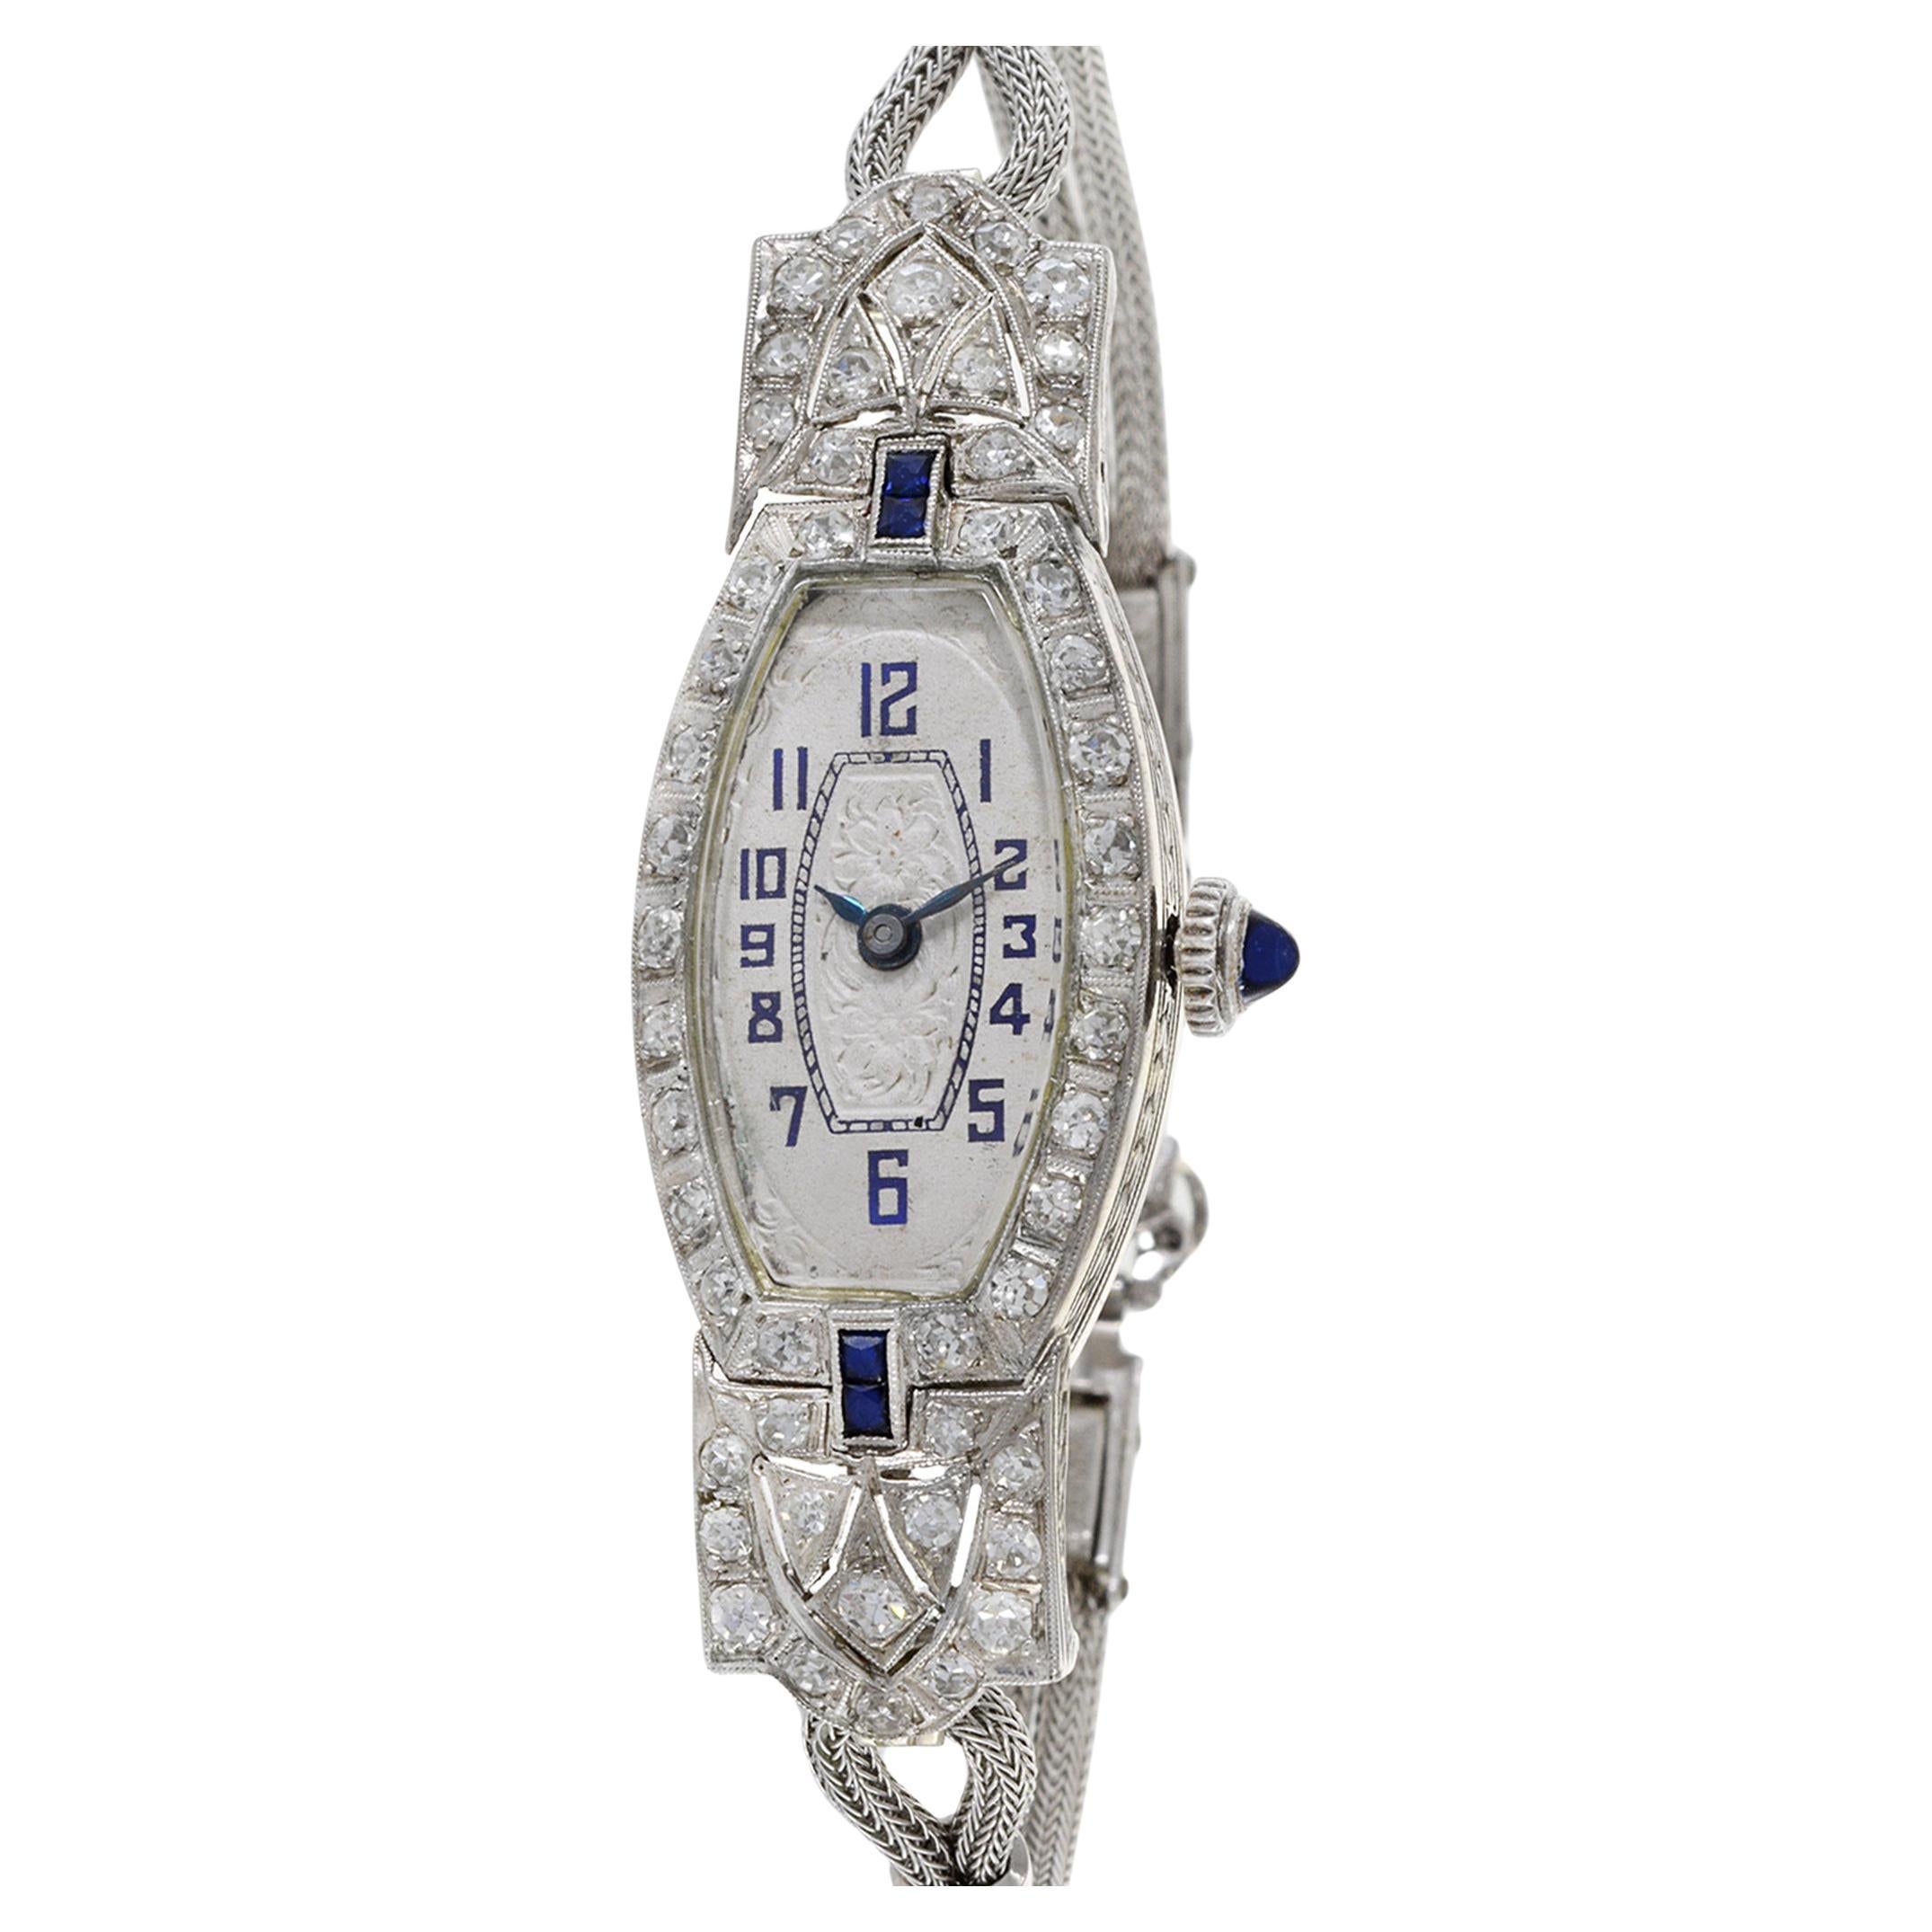 Nerny Platinum Cocktail Watch With Diamonds and Sapphires